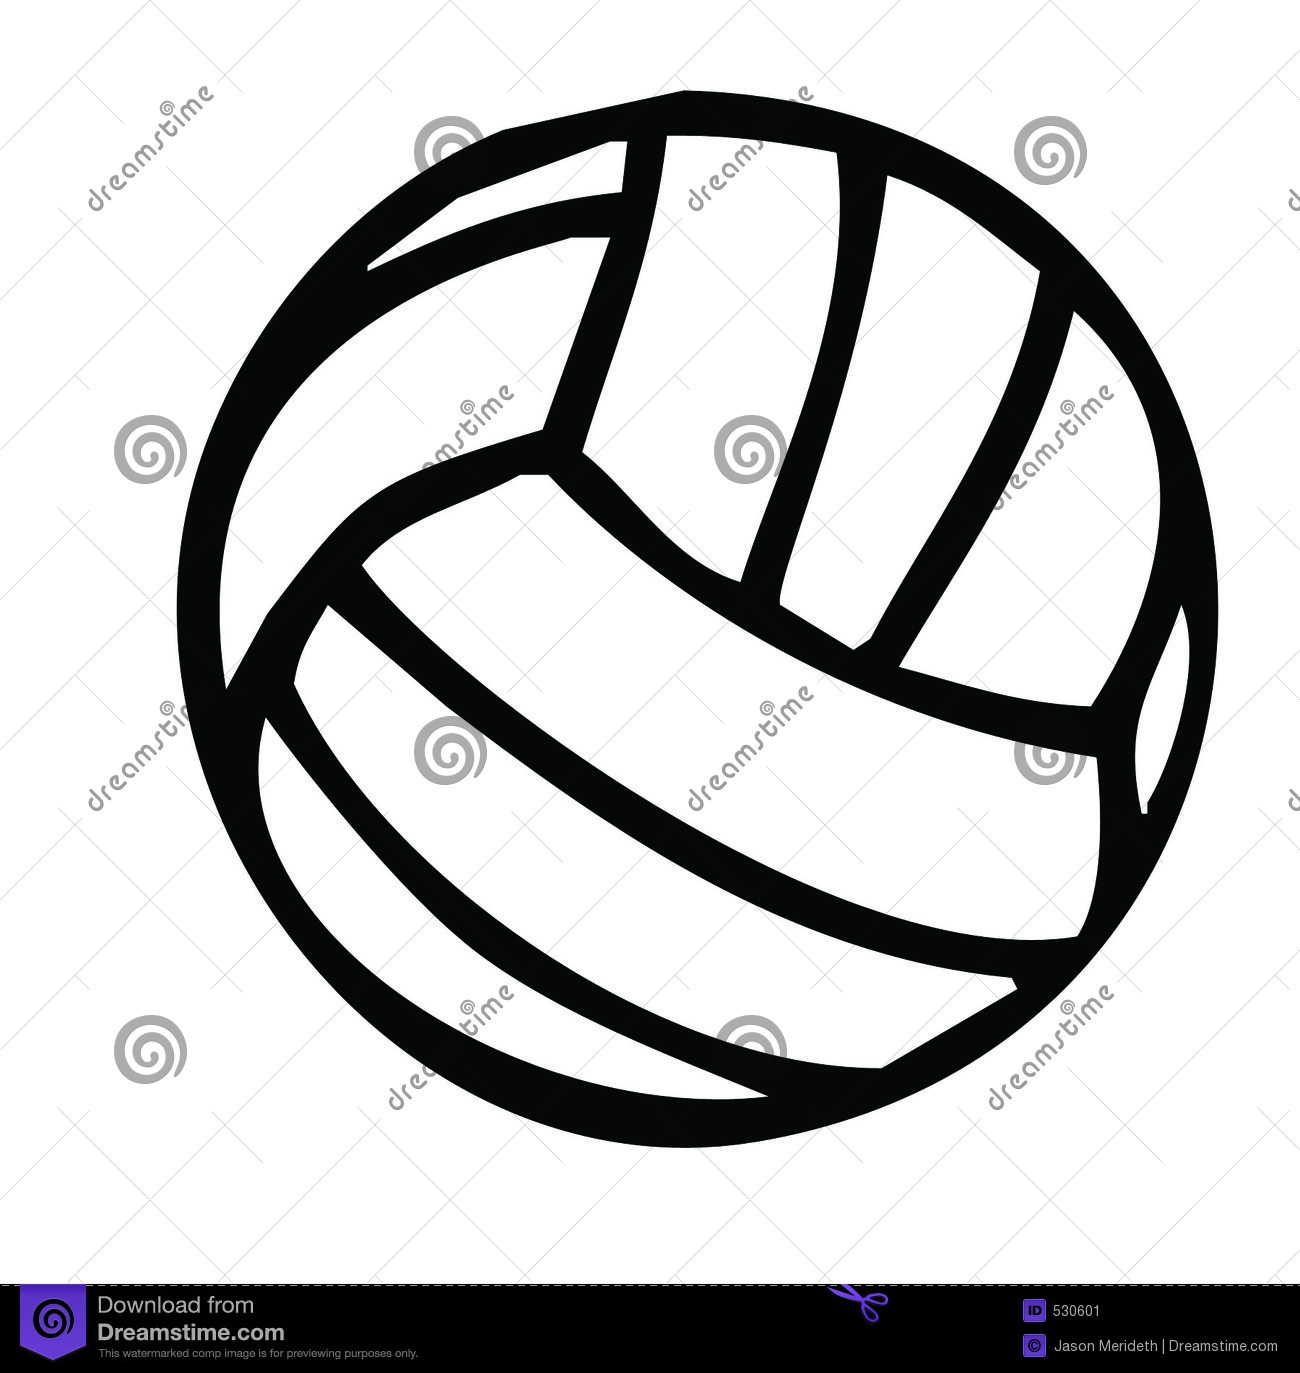 Volleyball Silhouette Stock Image   Image  530601